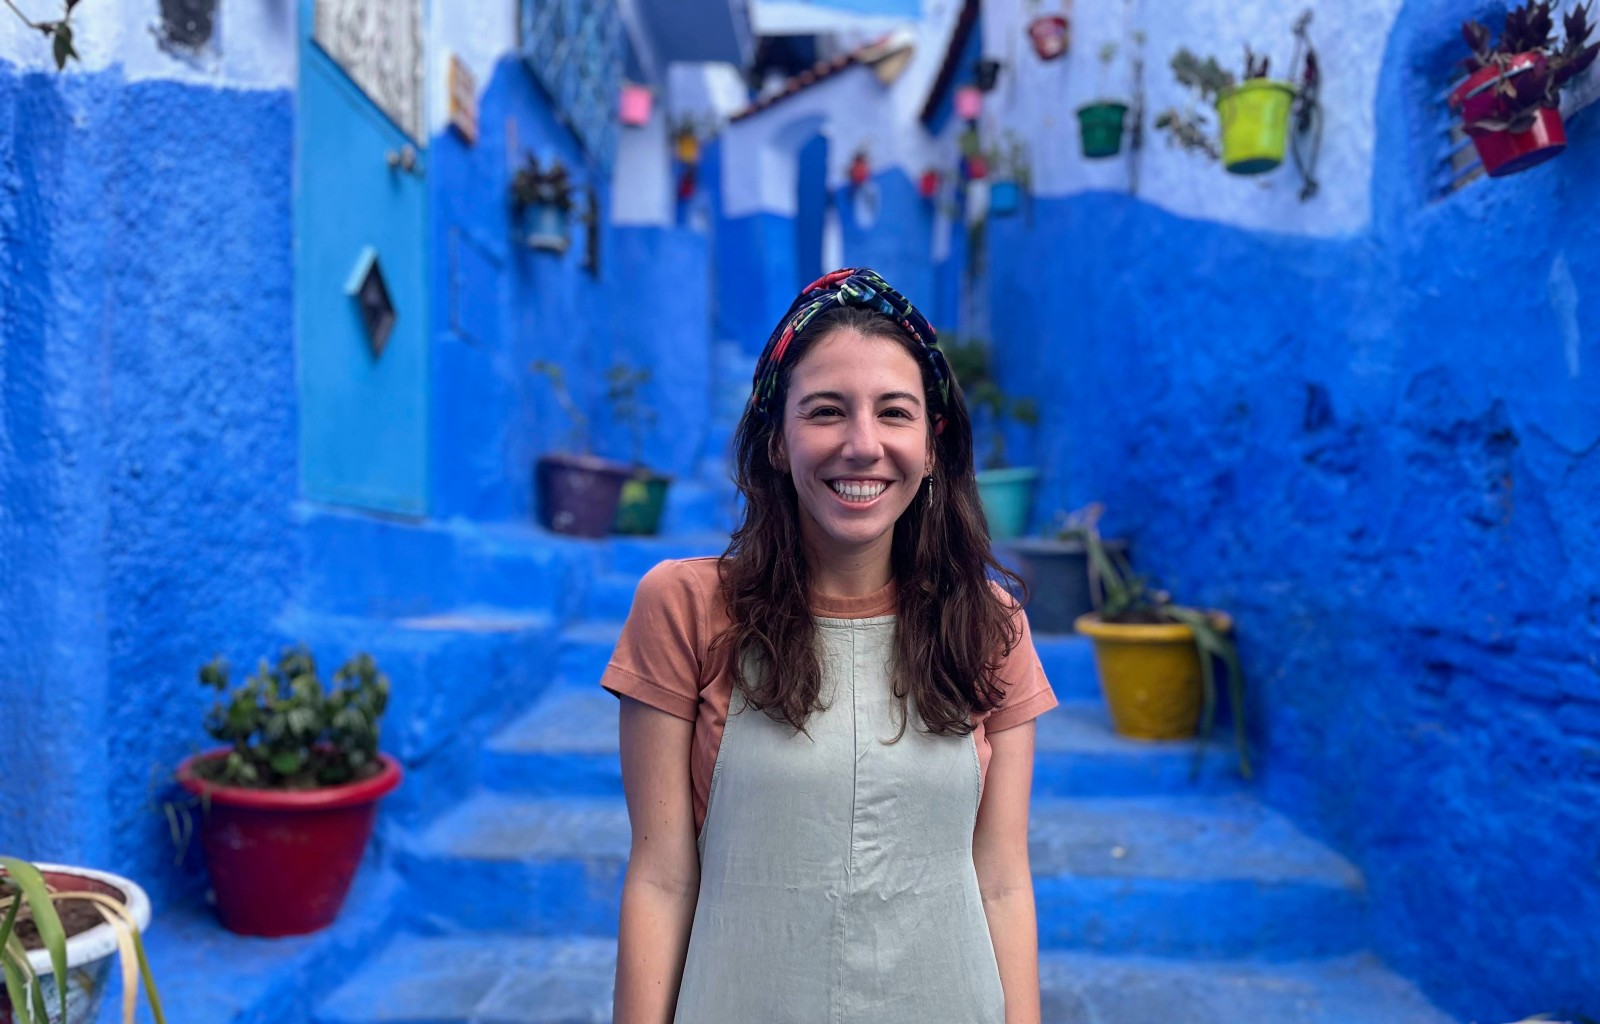 Woman standing in front of bright blue city walls